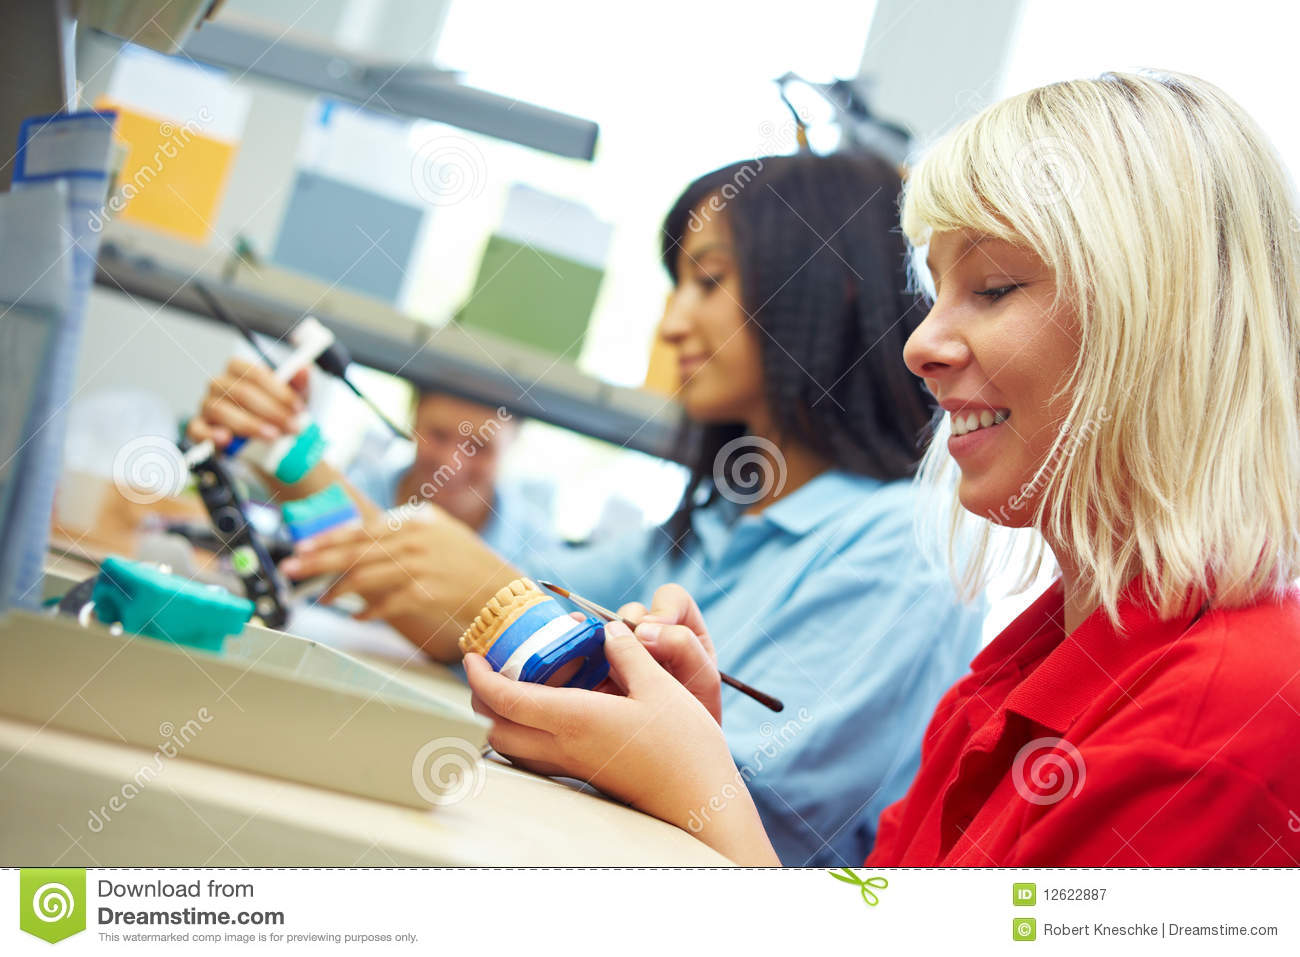 Women Working Together Royalty Free Stock Photography   Image